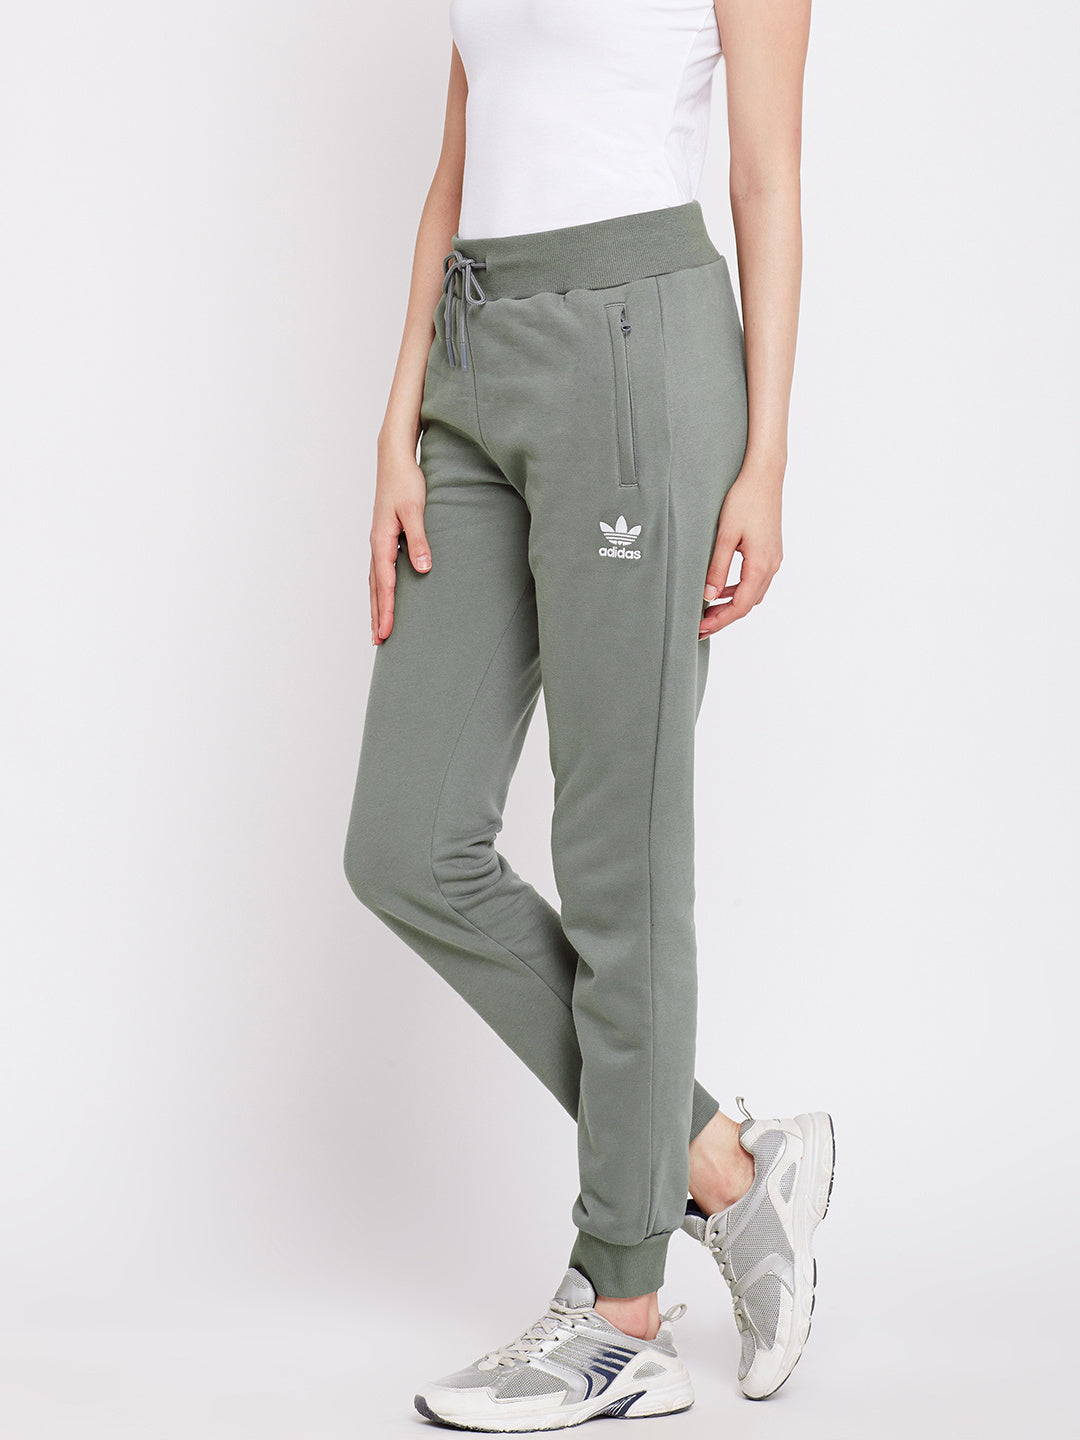 Adidas Women's Pastel Camo Cuffed Track Pants BR6605 – Mann Sports Outlet